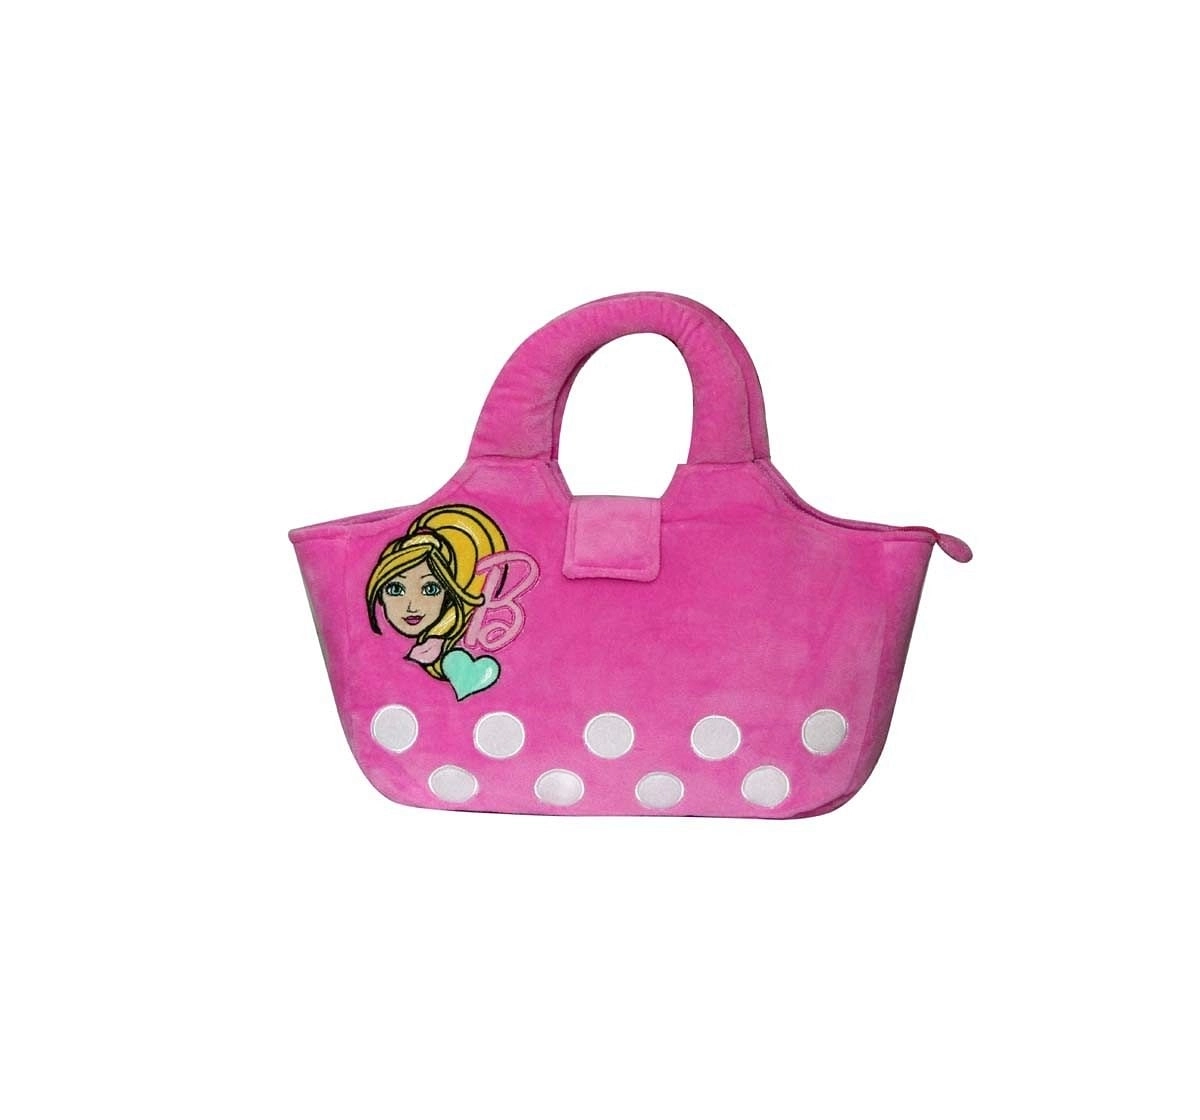 Soft Buddies Barbie Styling Hand Bag Plush Accessories for Kids age 12M+ 35.56 Cm 